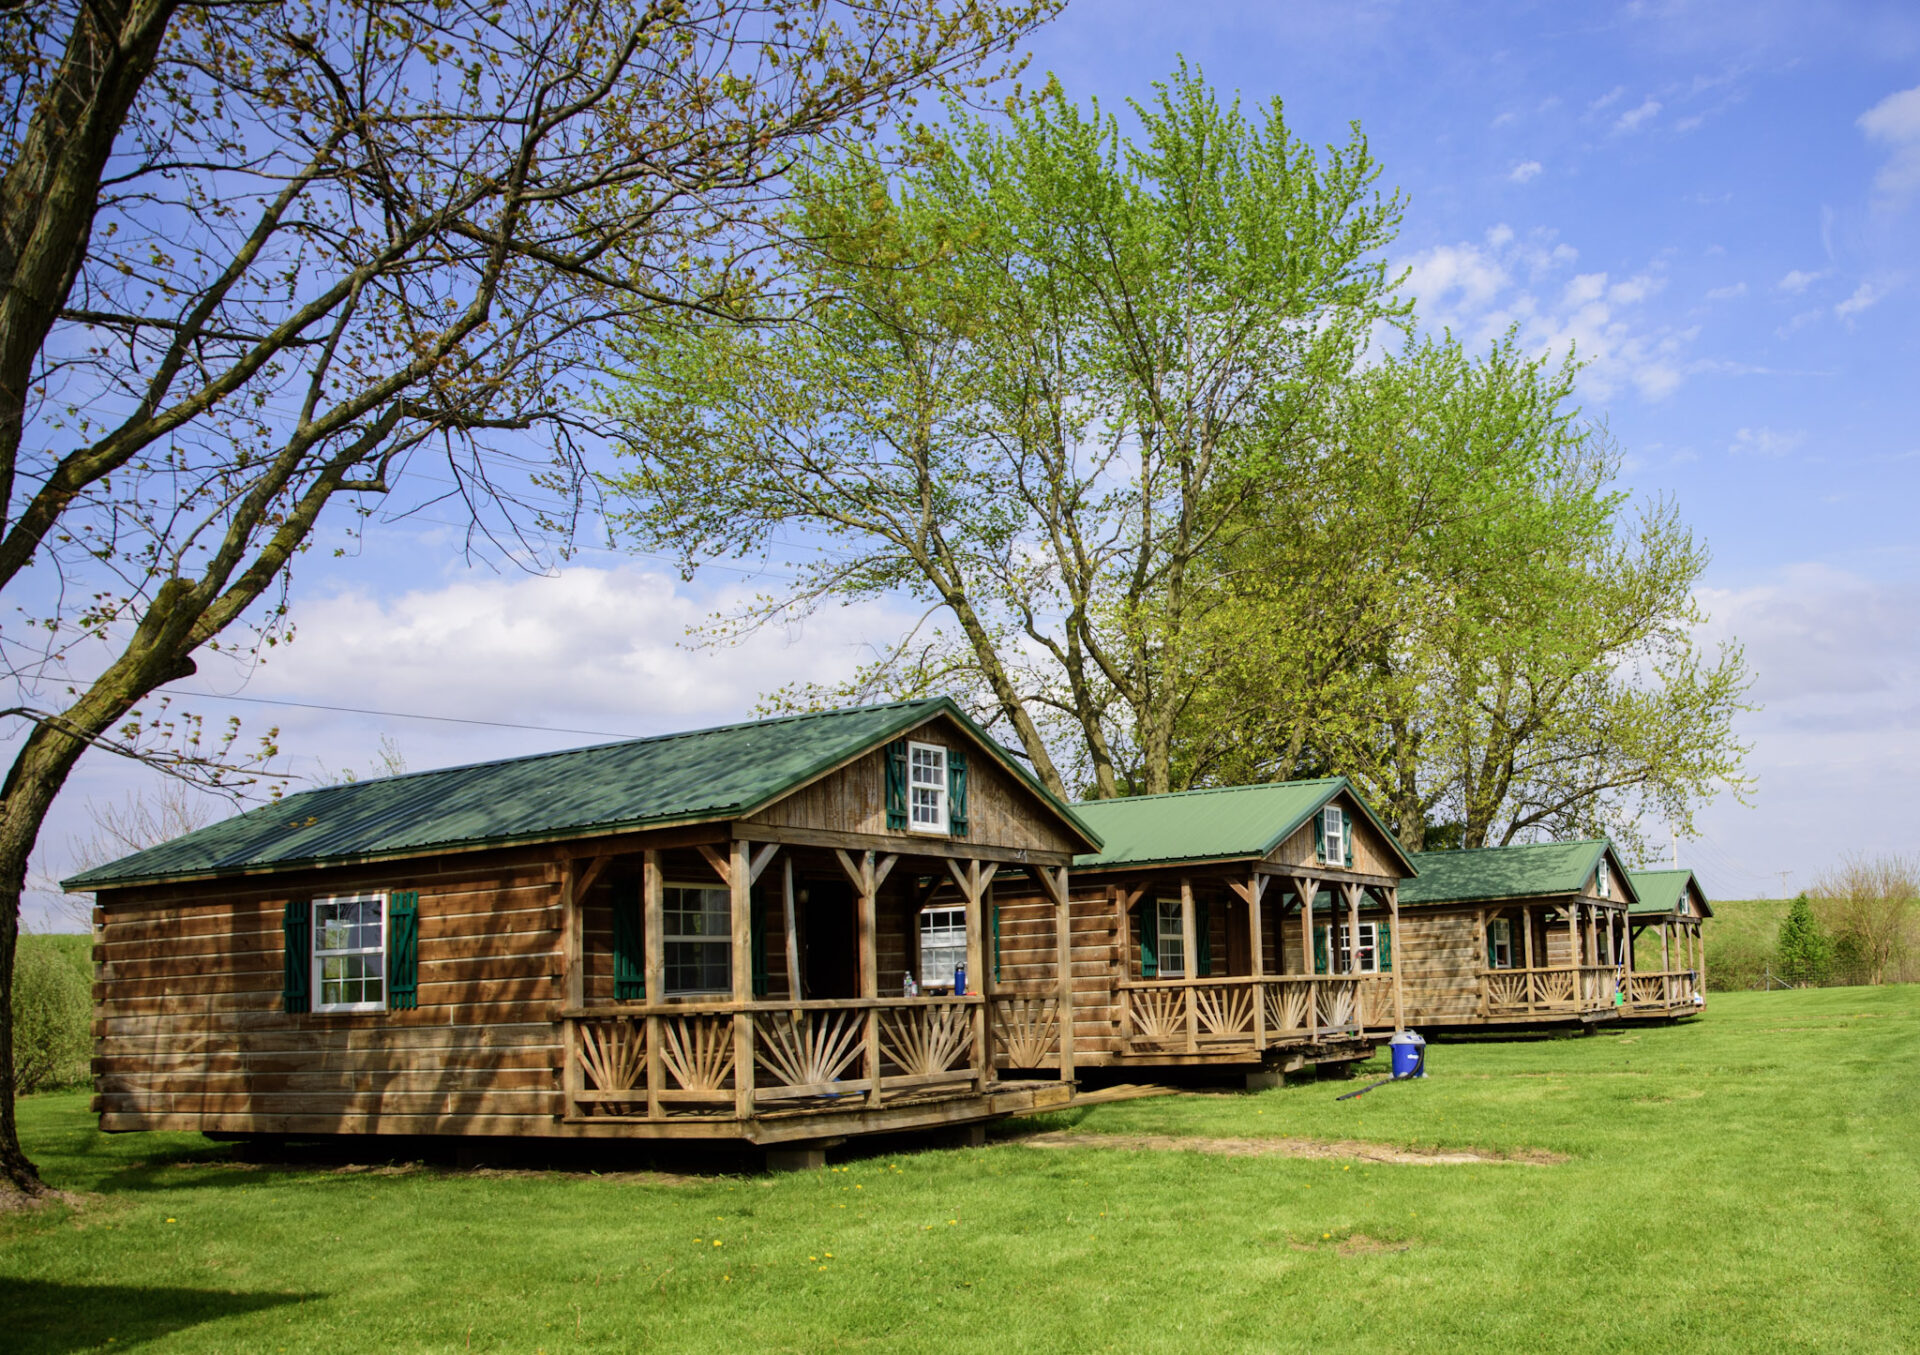 A shot of the Mystic Waters Campground rustic cabins